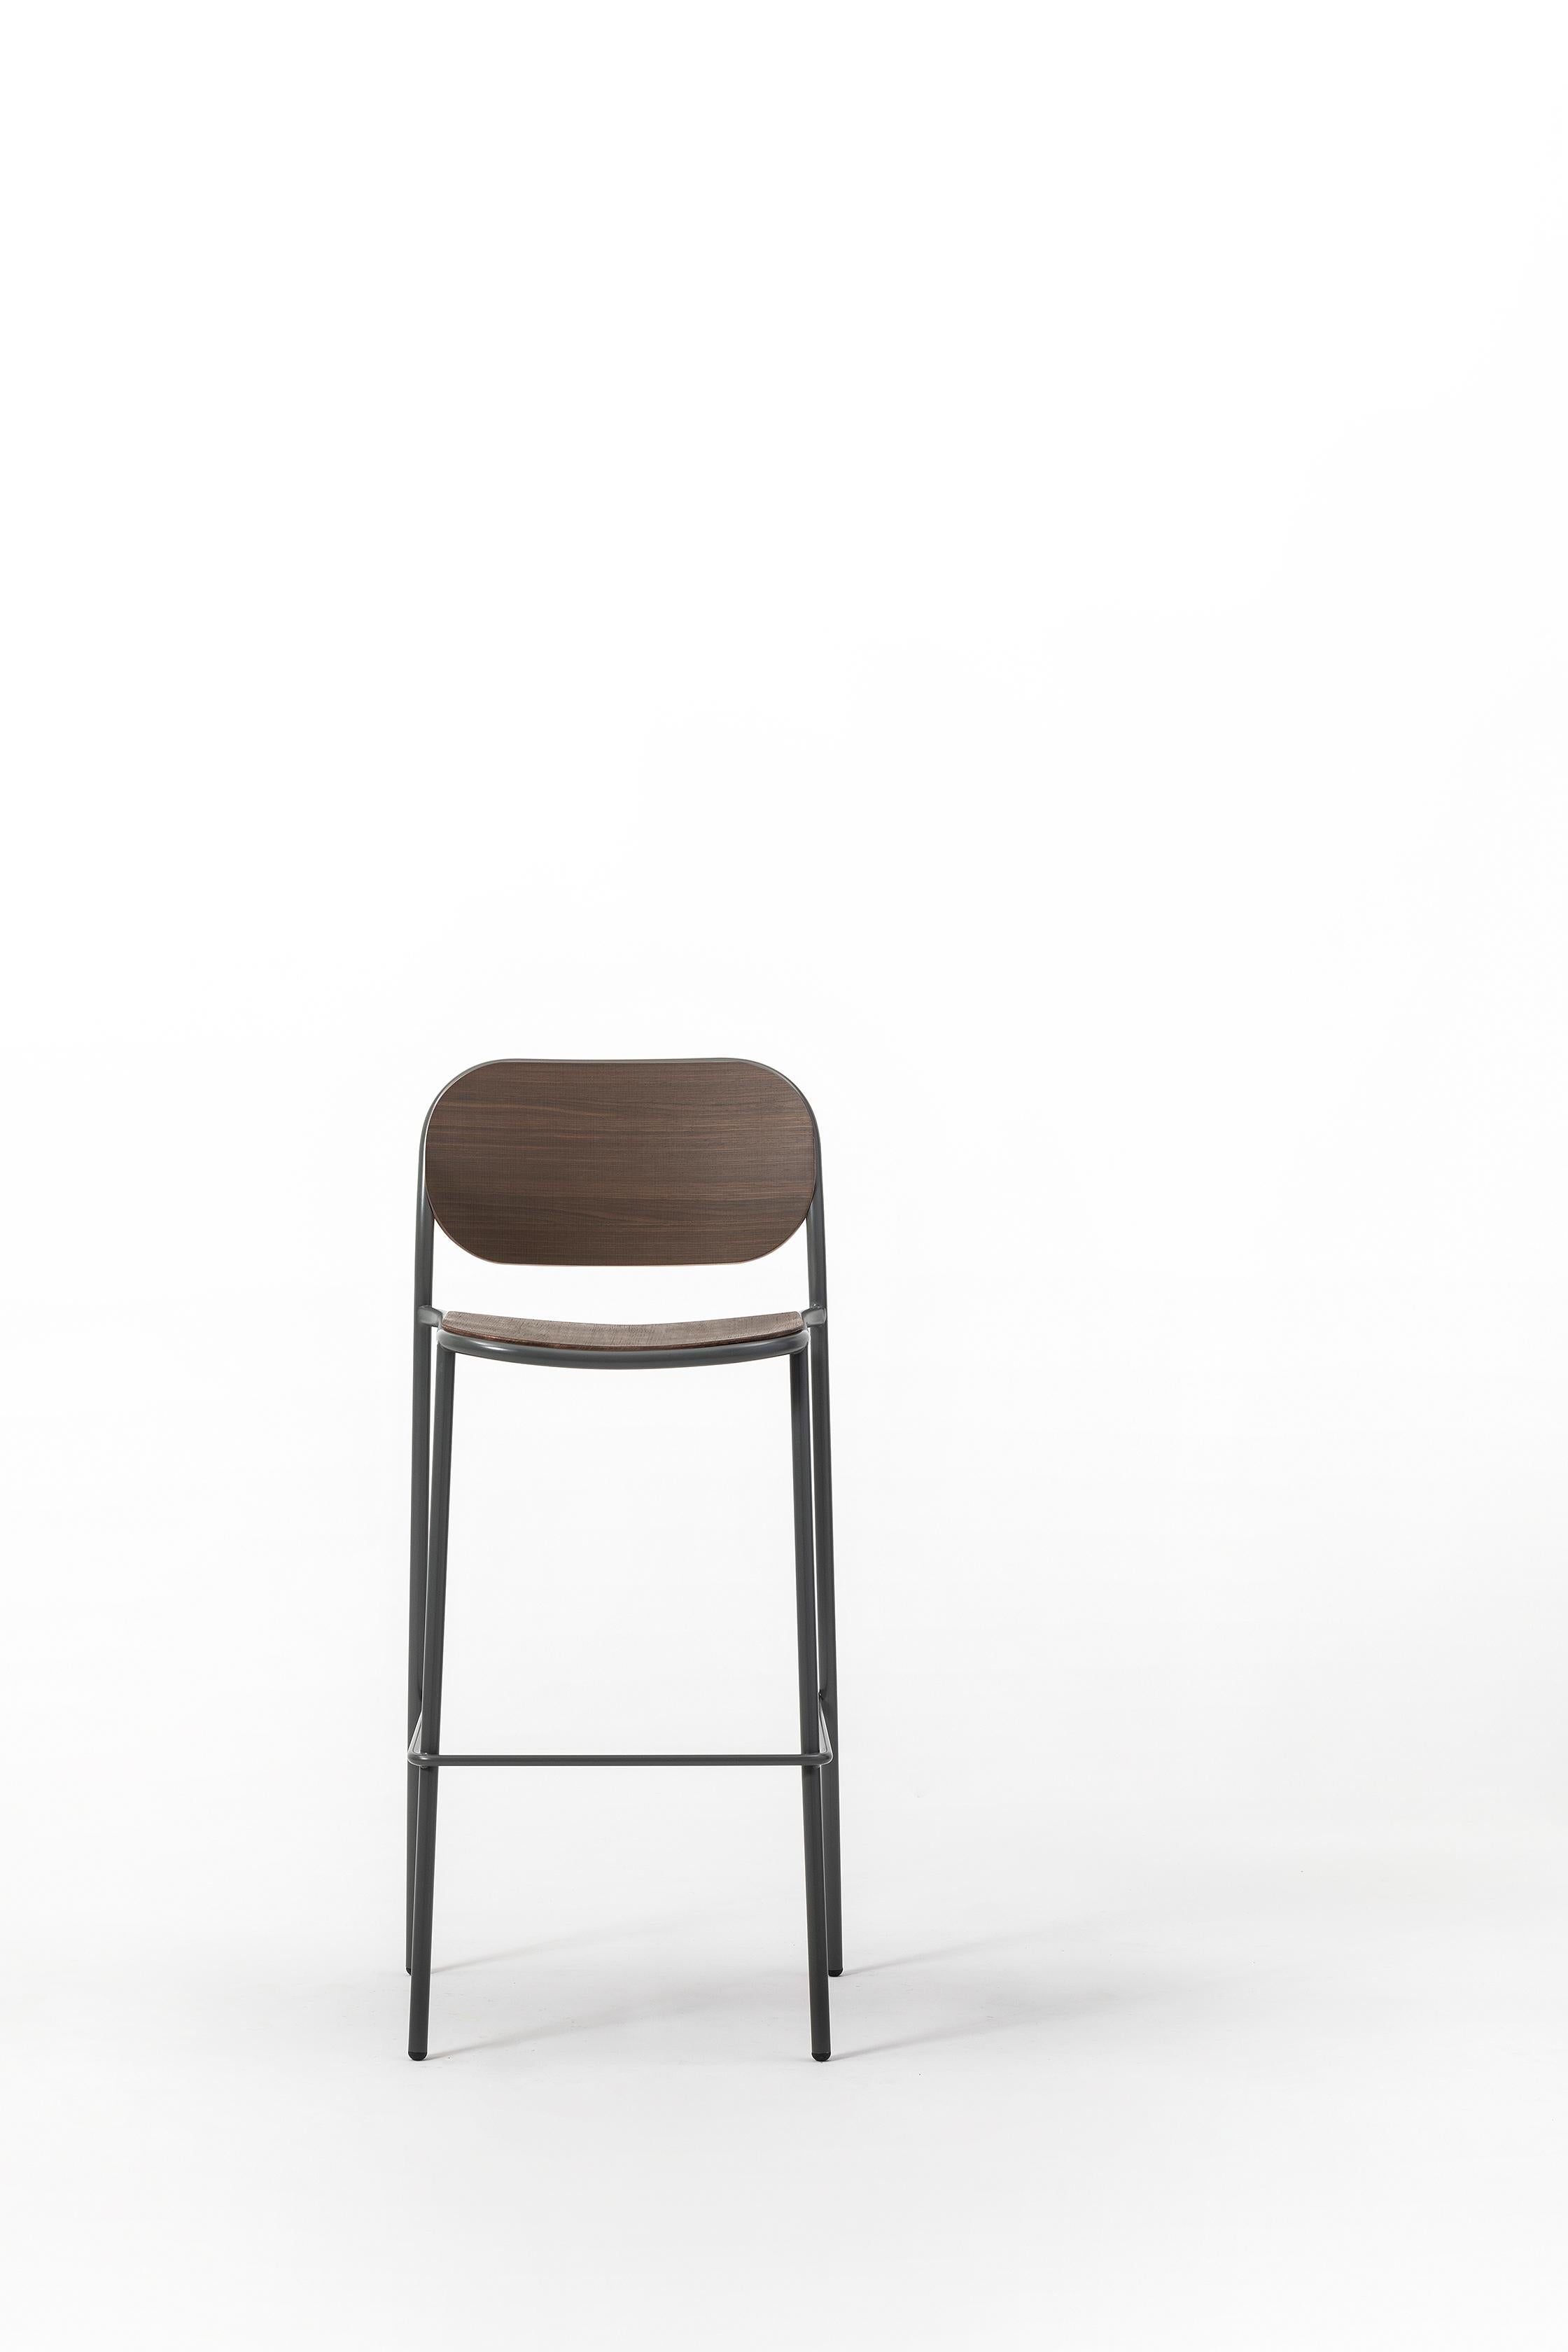 Metis Wood, a complete collection for modern spaces inspired by 1950s Scandinavian simplicity. The metal frame with curved lines, customisable in different colours, is combined with the seat and backrest in ash, oak or heat-treated oak. The chair